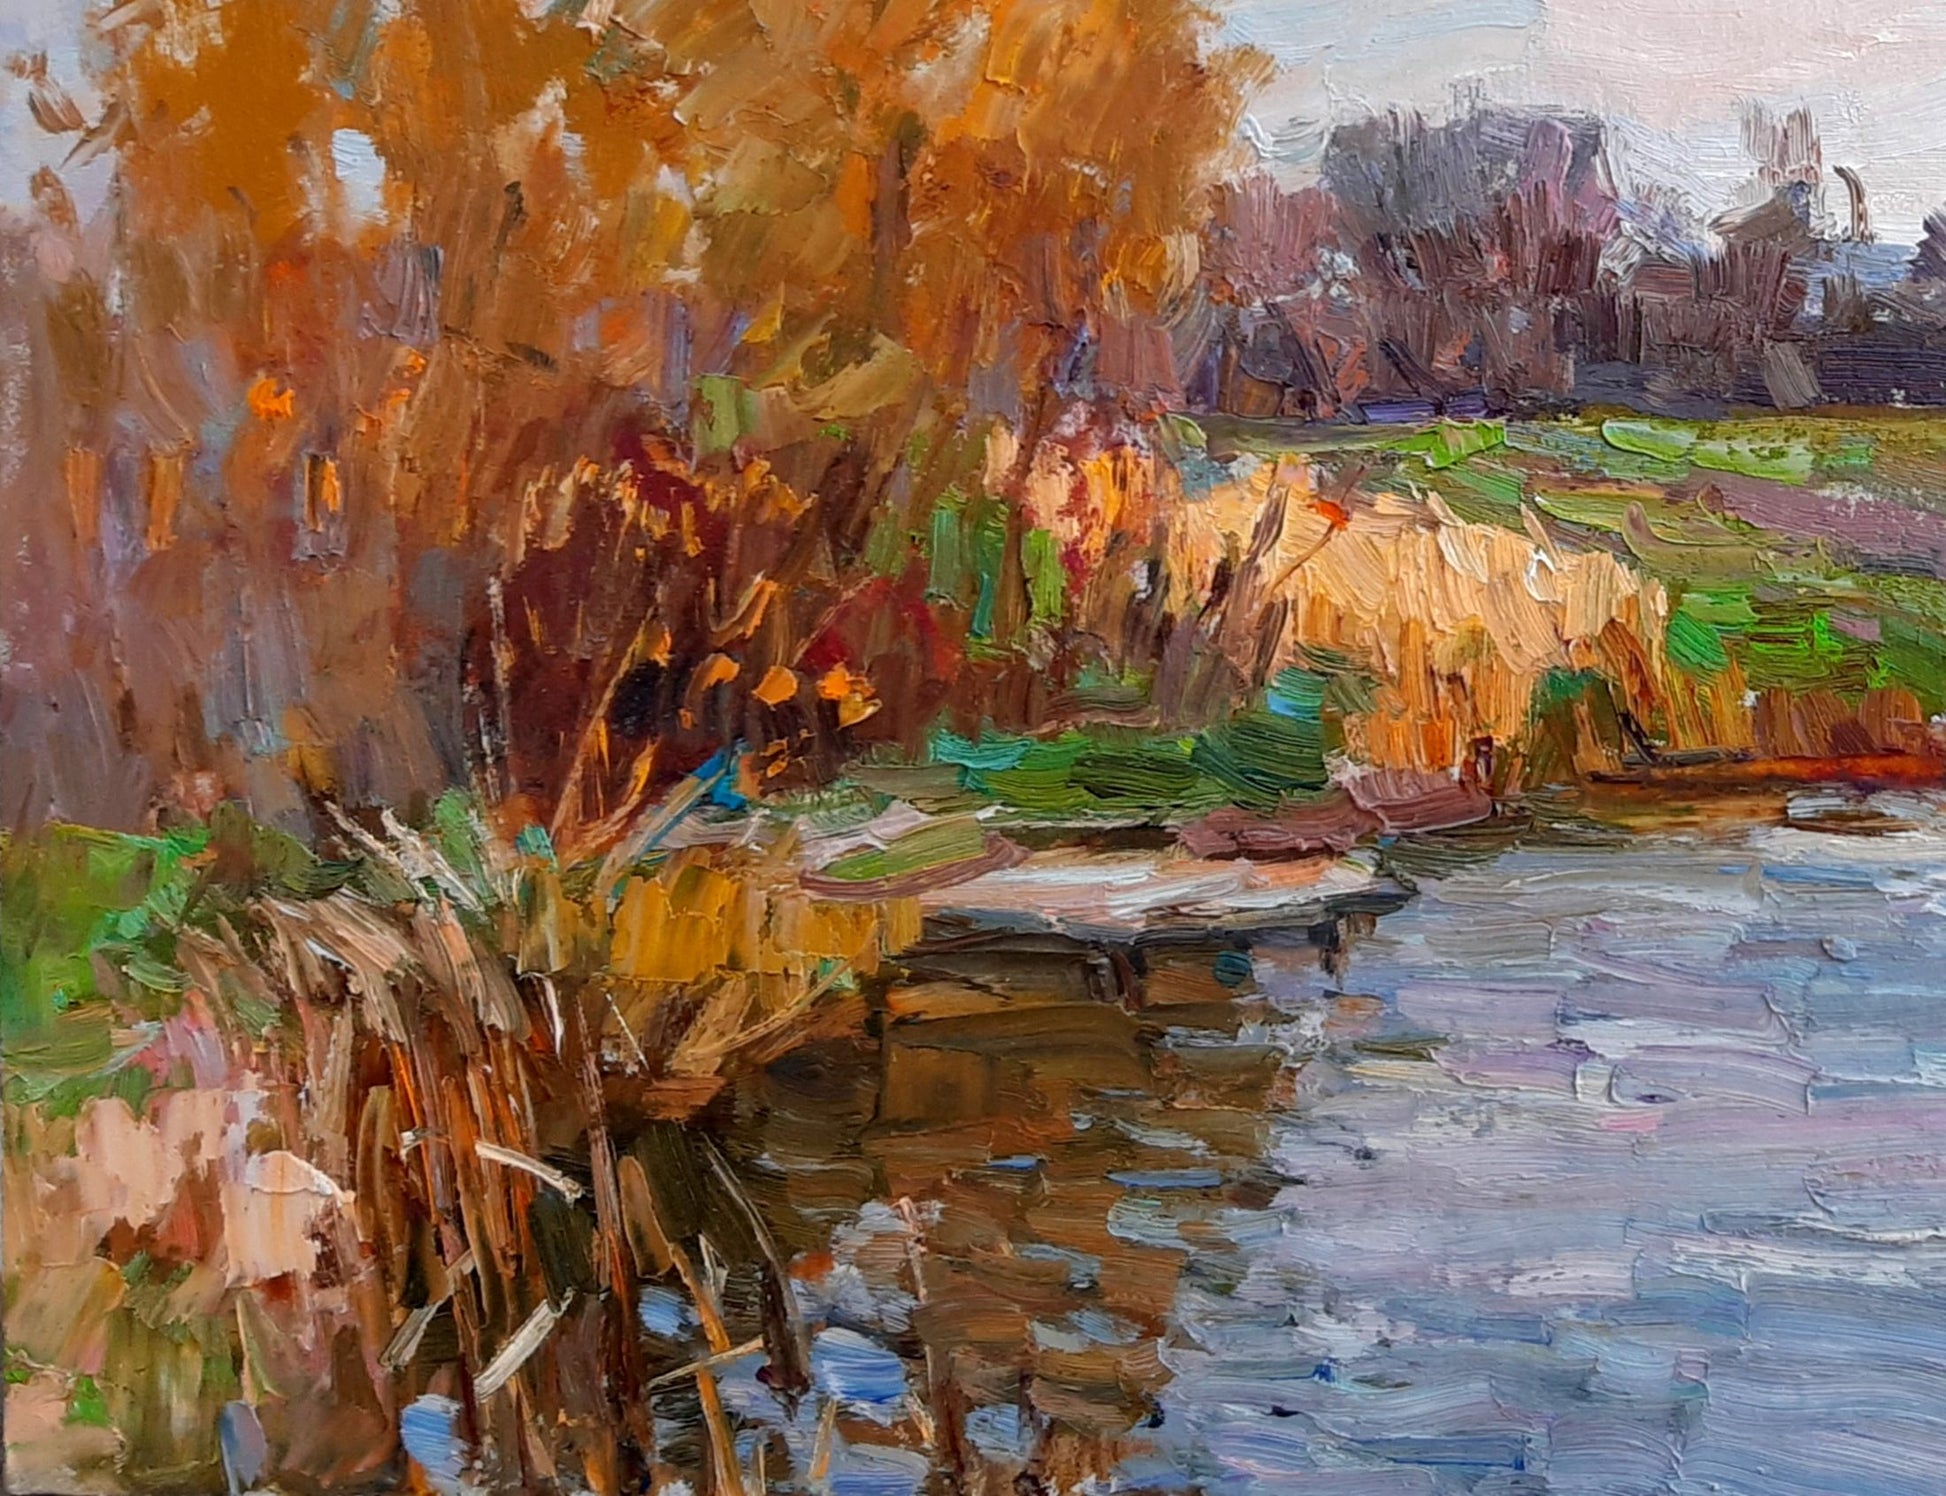 Oil painting "October Morning" created by Vyacheslav Pereta